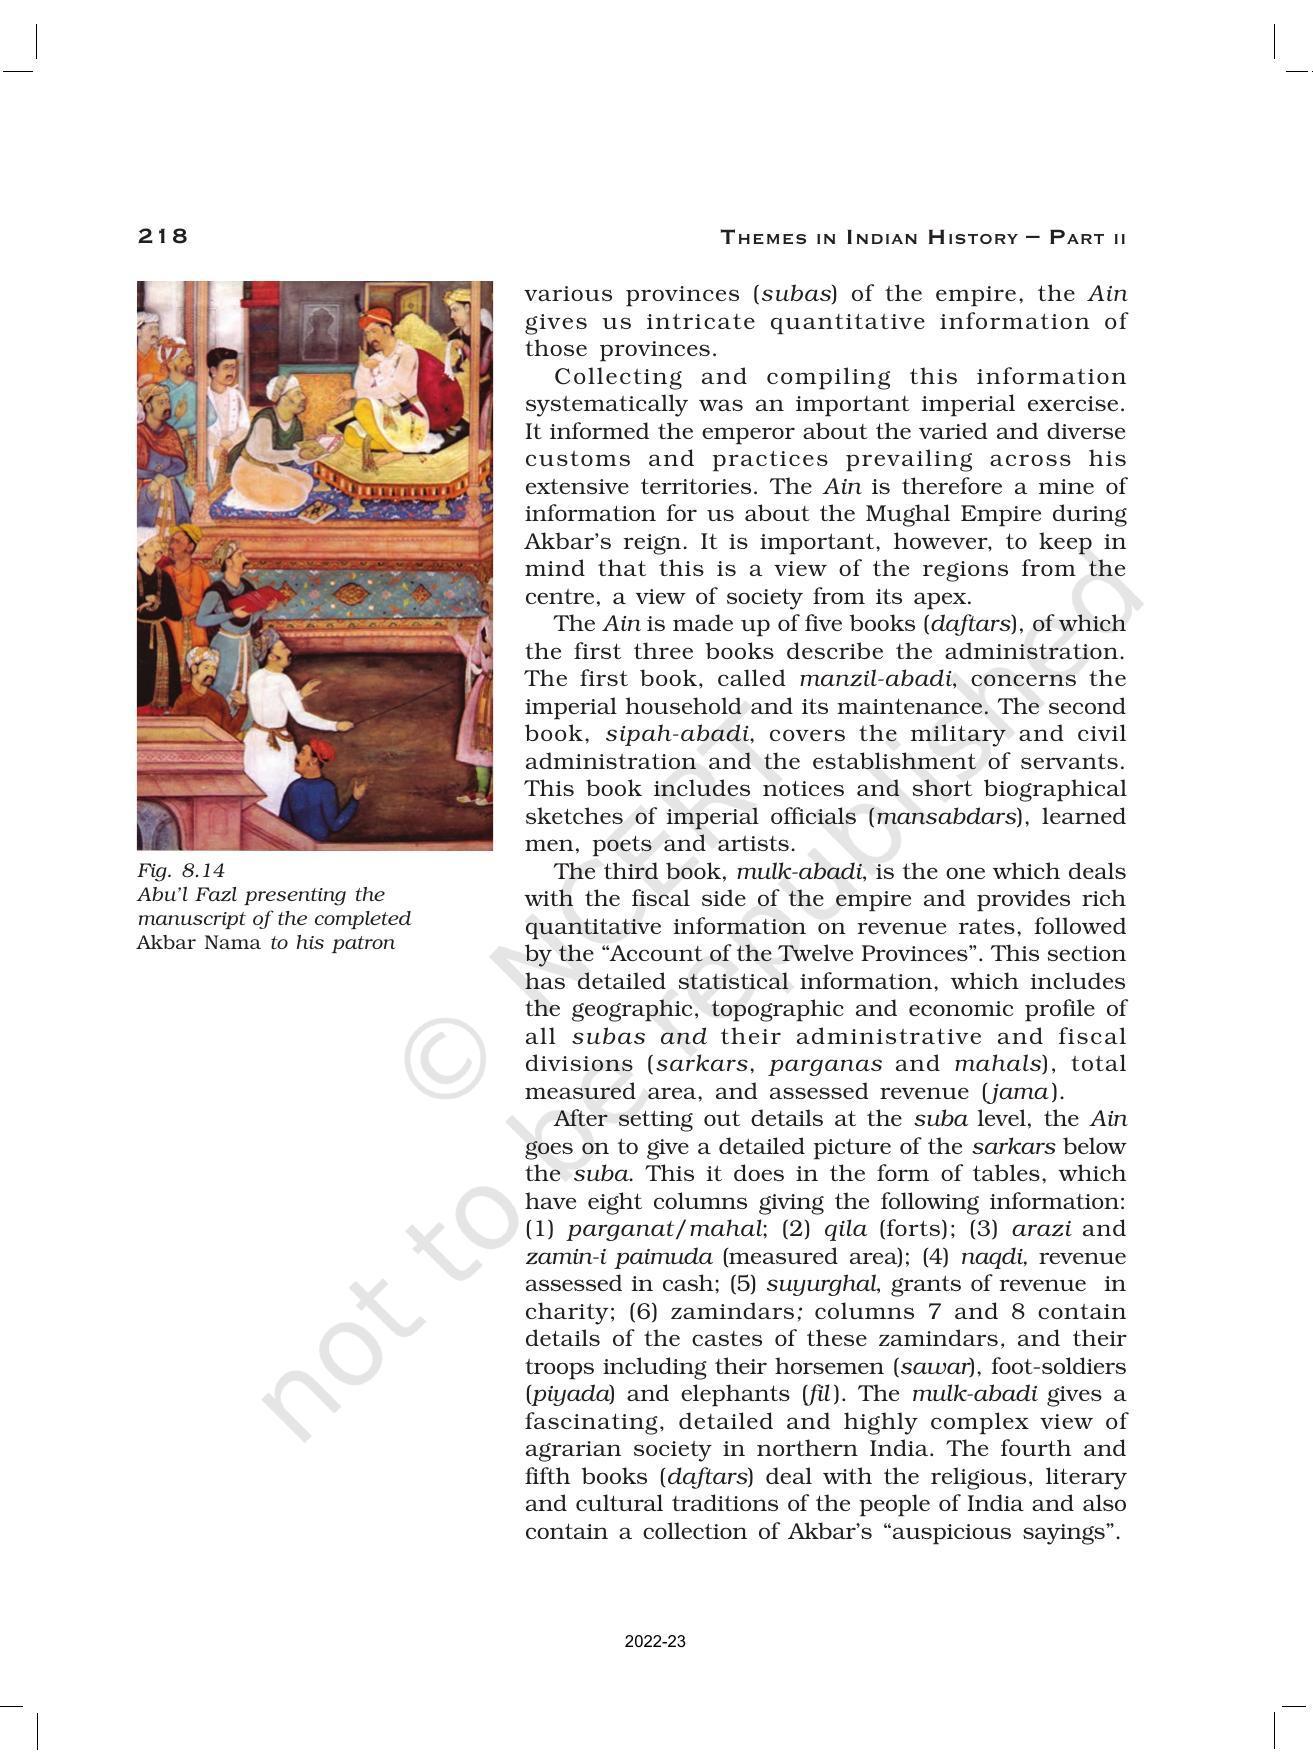 NCERT Book for Class 12 History (Part-II) Chapter 8 Peasants, Zamindars, and the State - Page 23